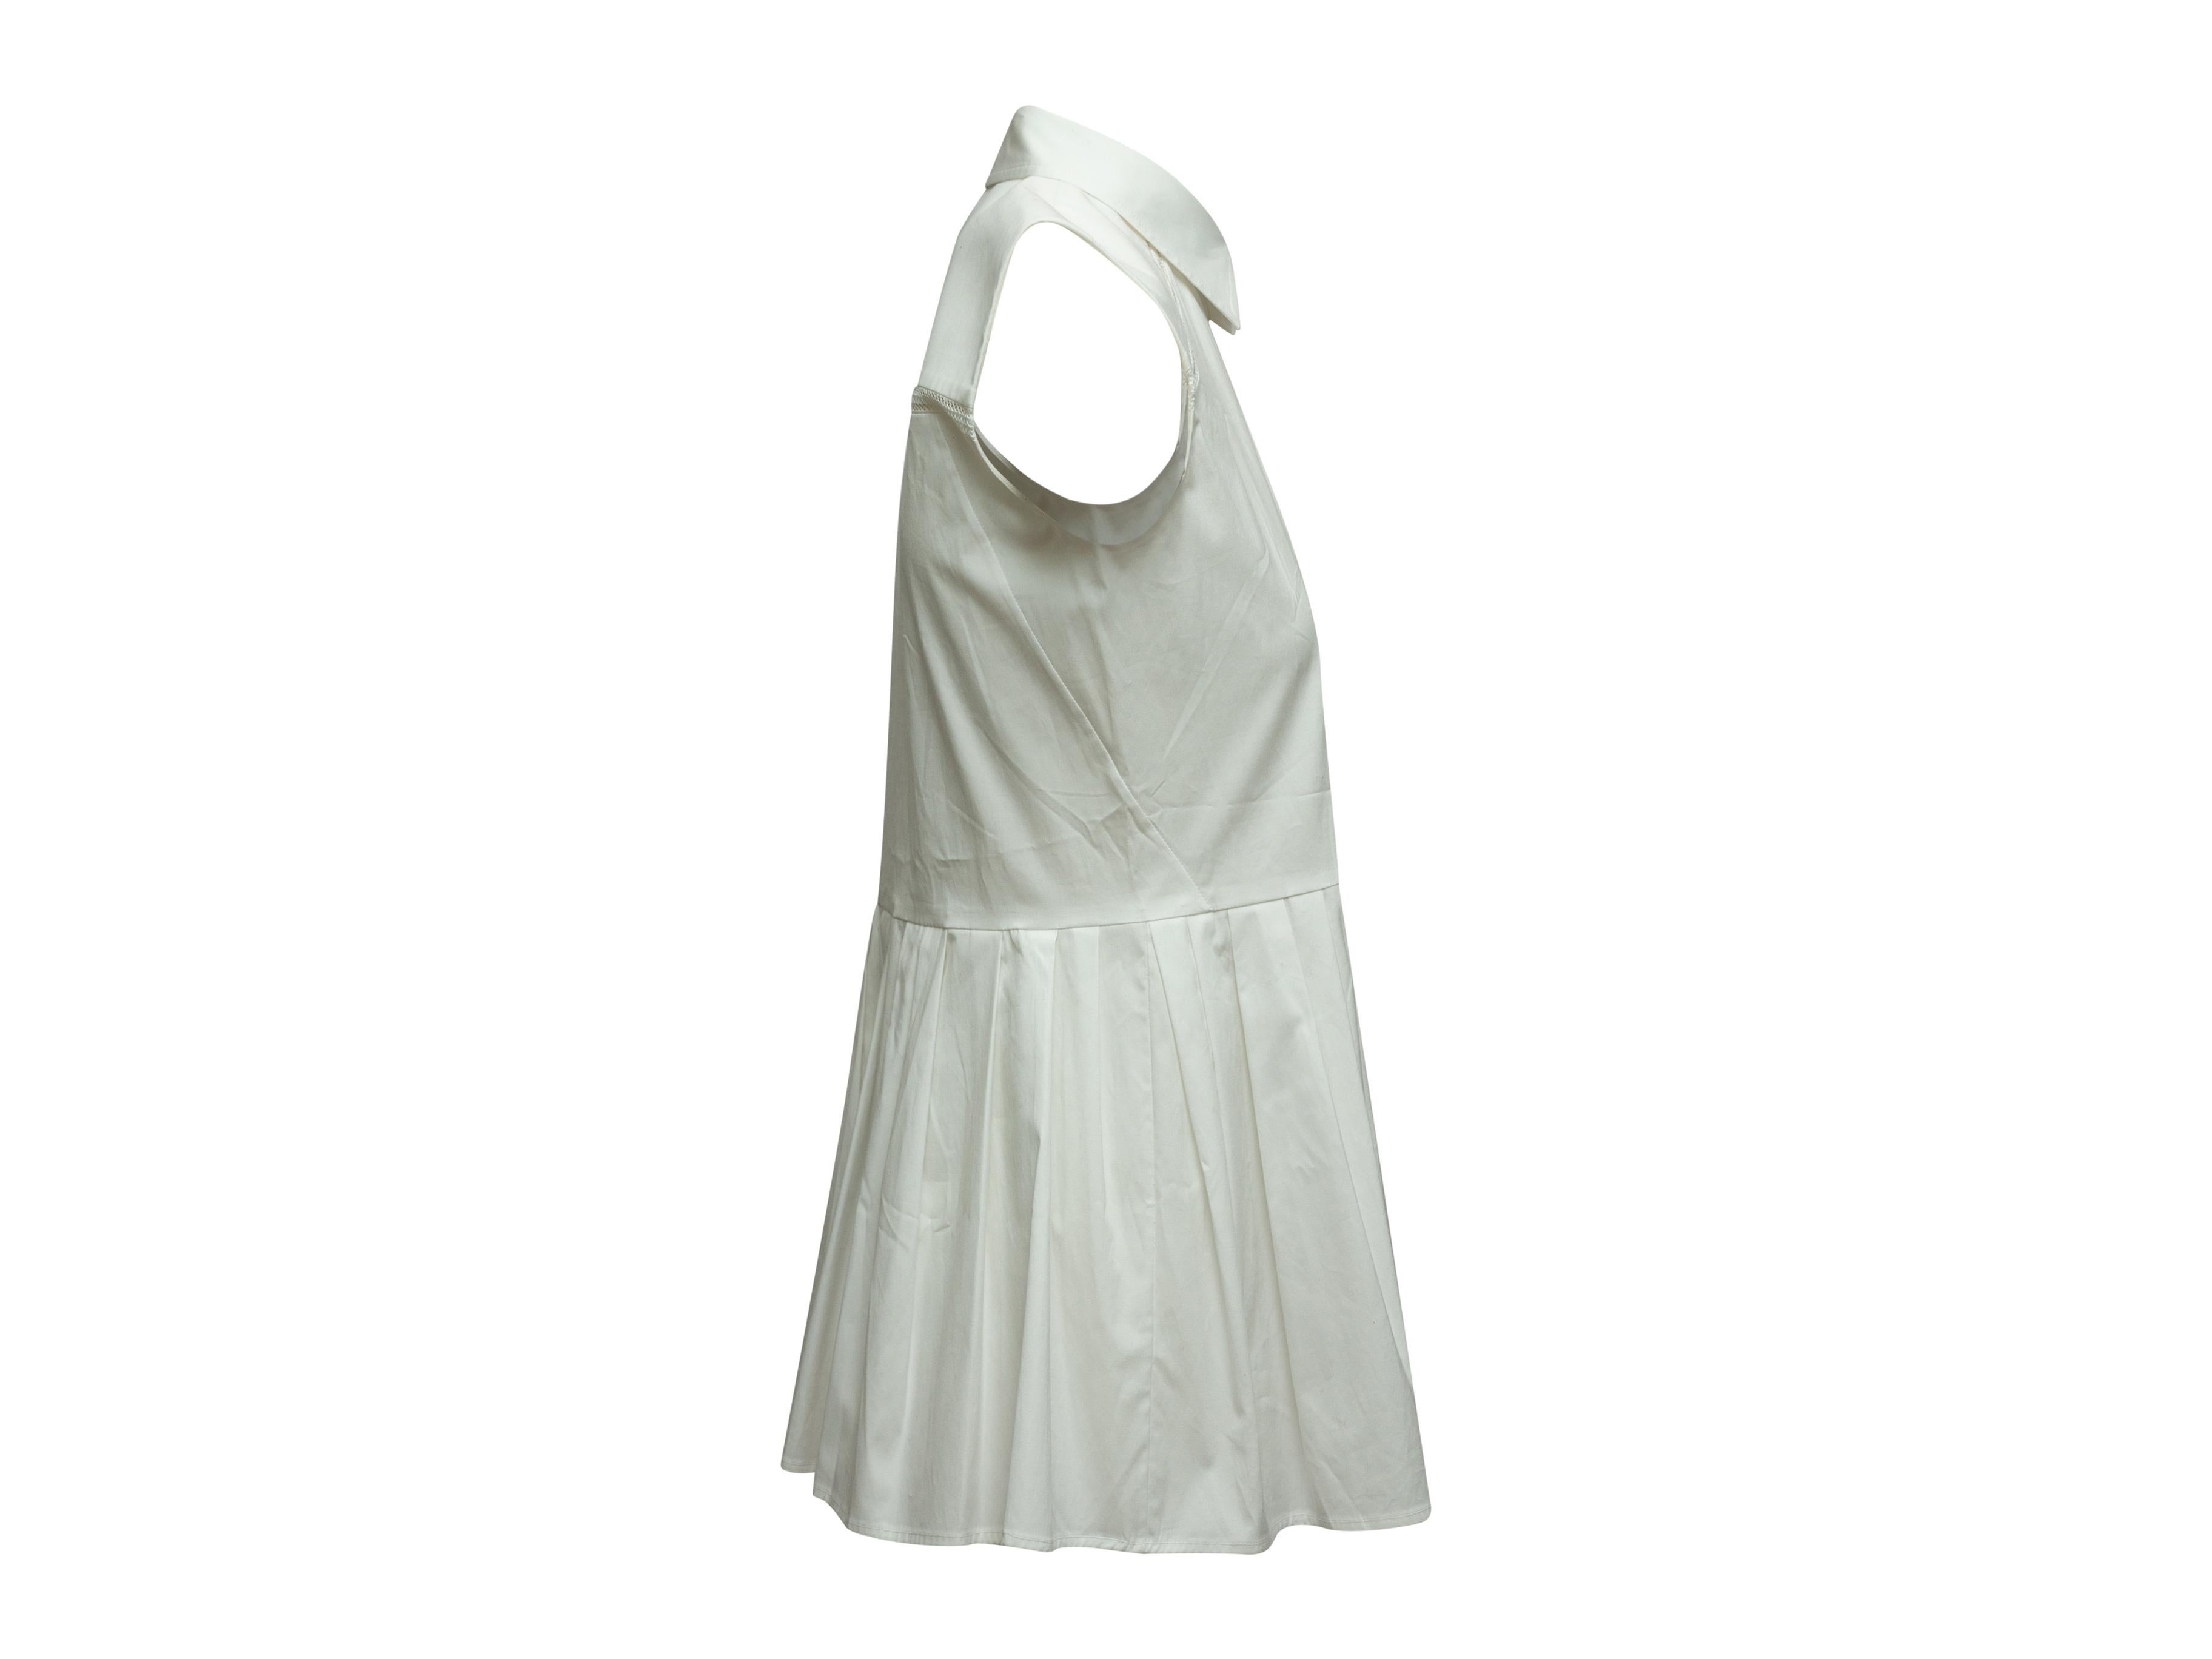 Product details: White sleeveless peplum top by Carolina Herrera. Pointed collar. Button closures at center front. 34